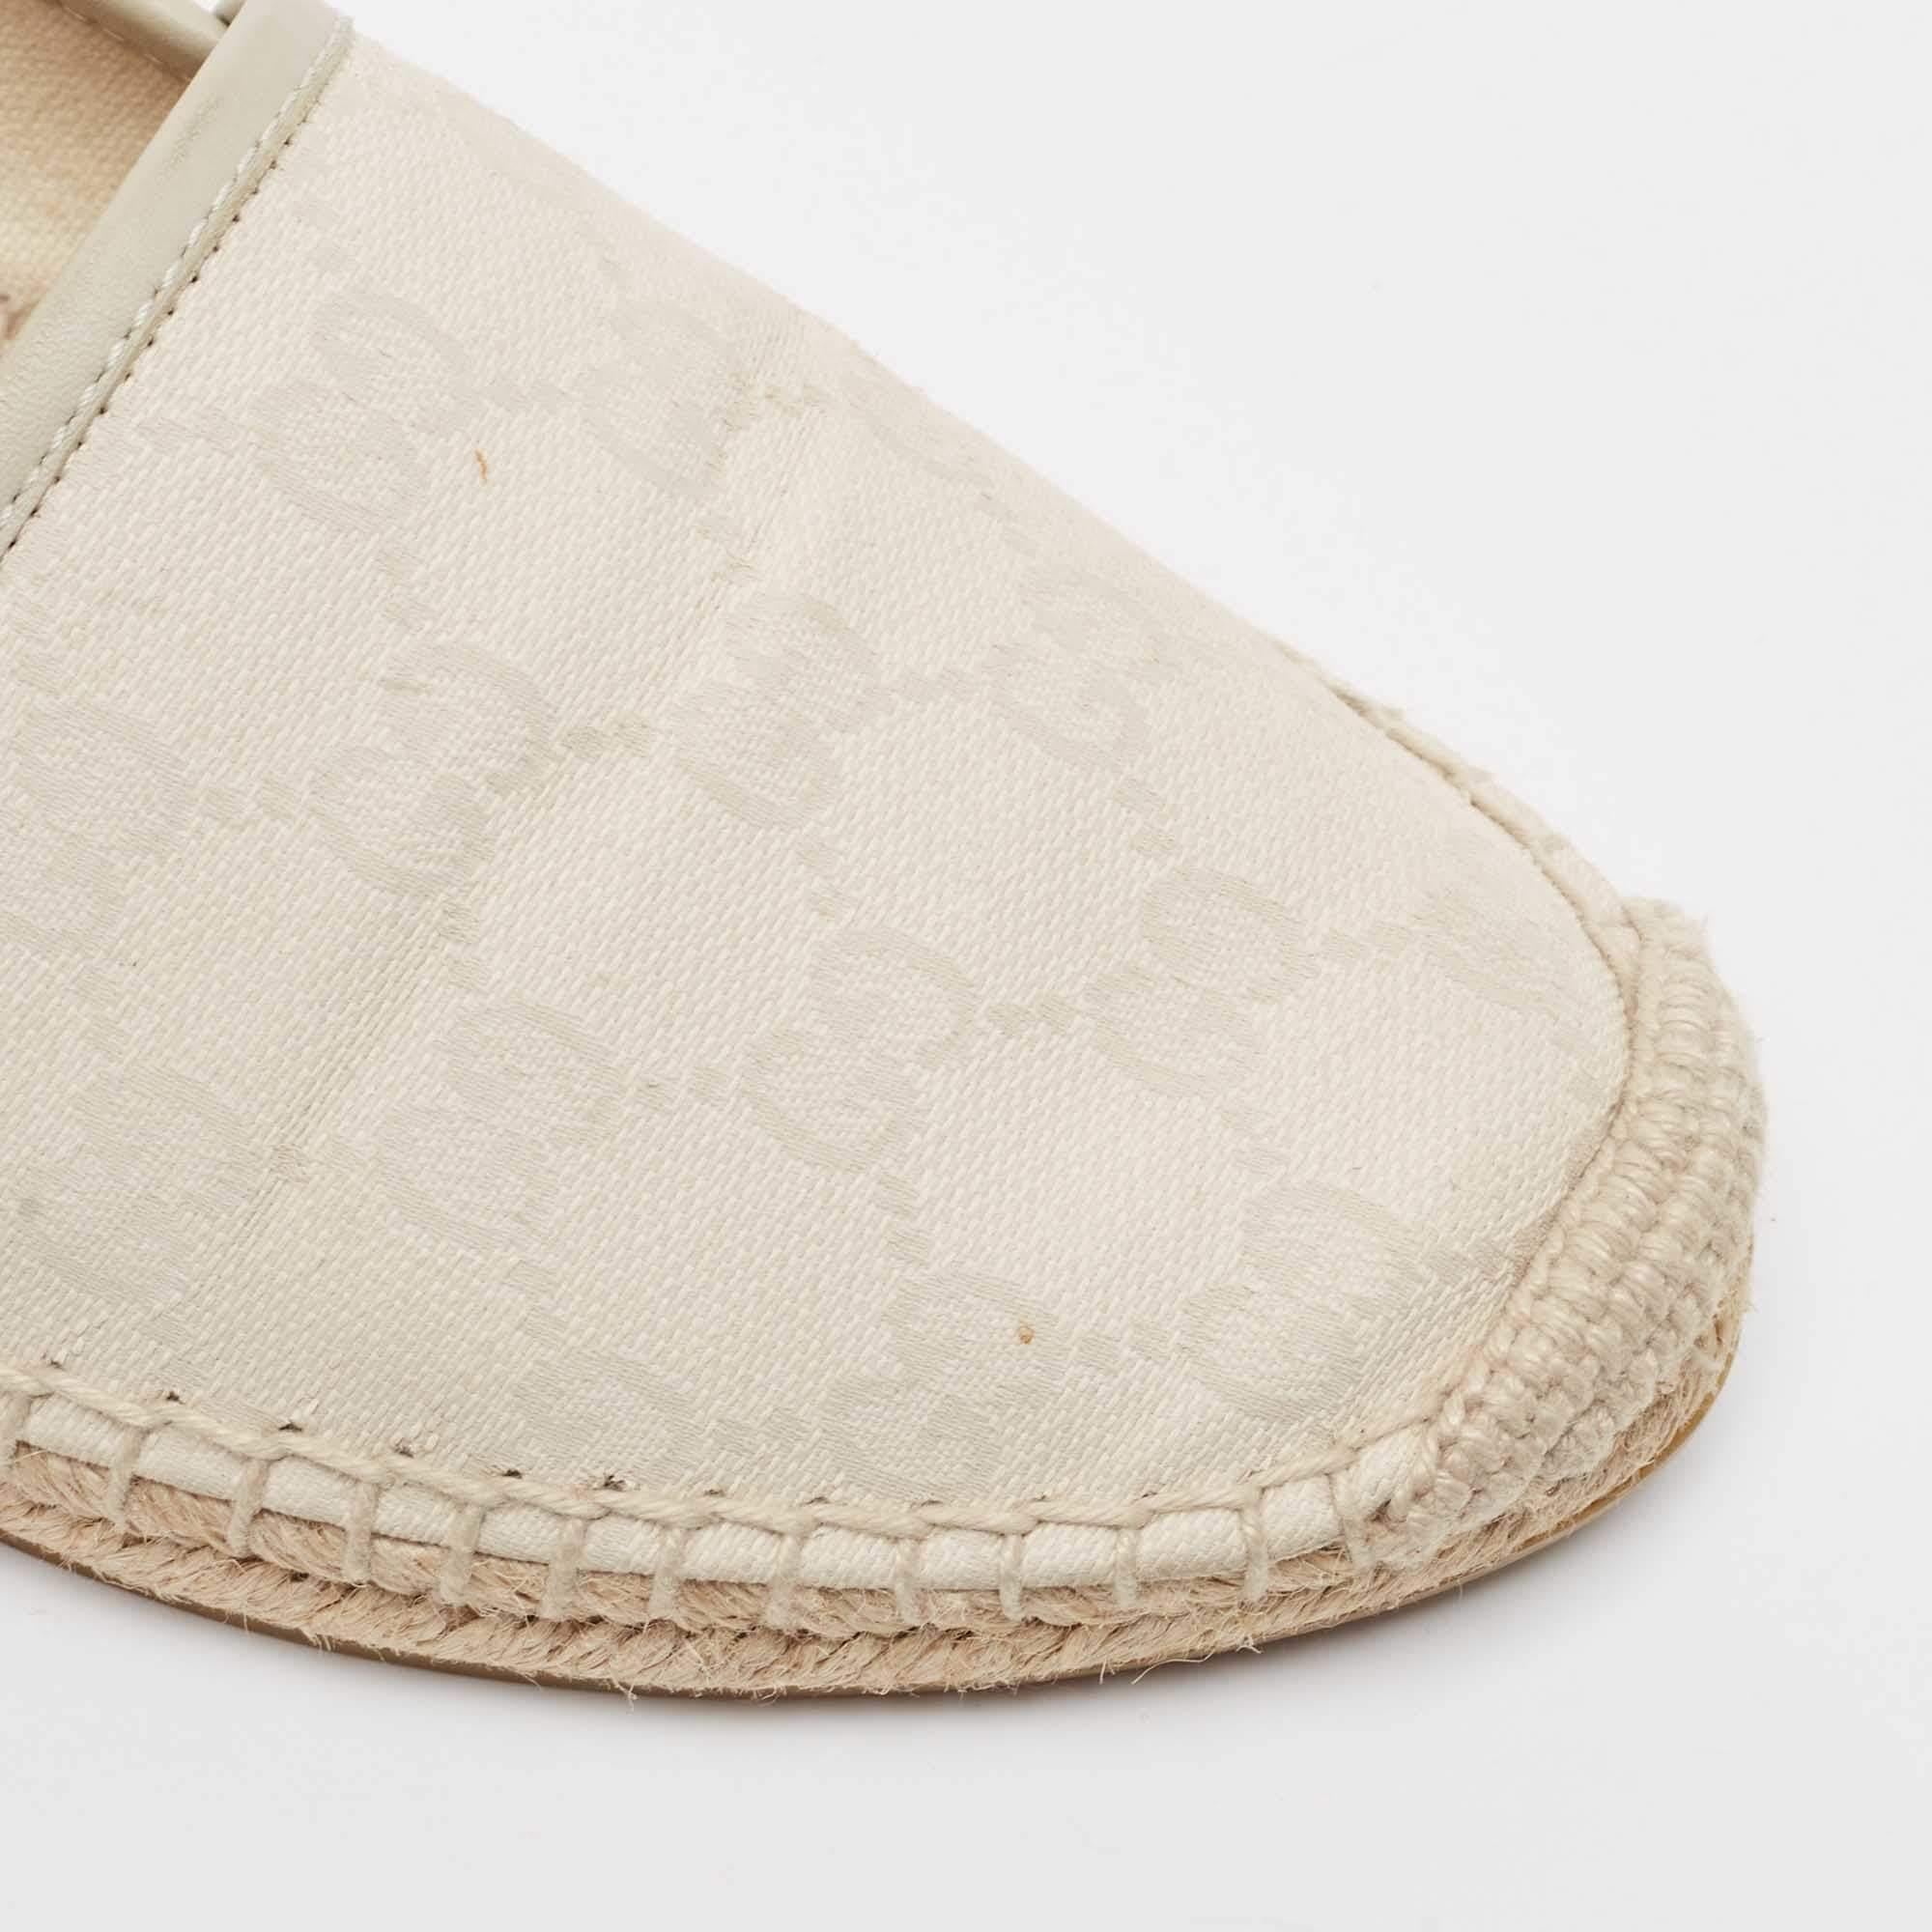 Gucci Cream/Grey GG Canvas and Leather Espadrilles Flats Size 38.5 For Sale 3